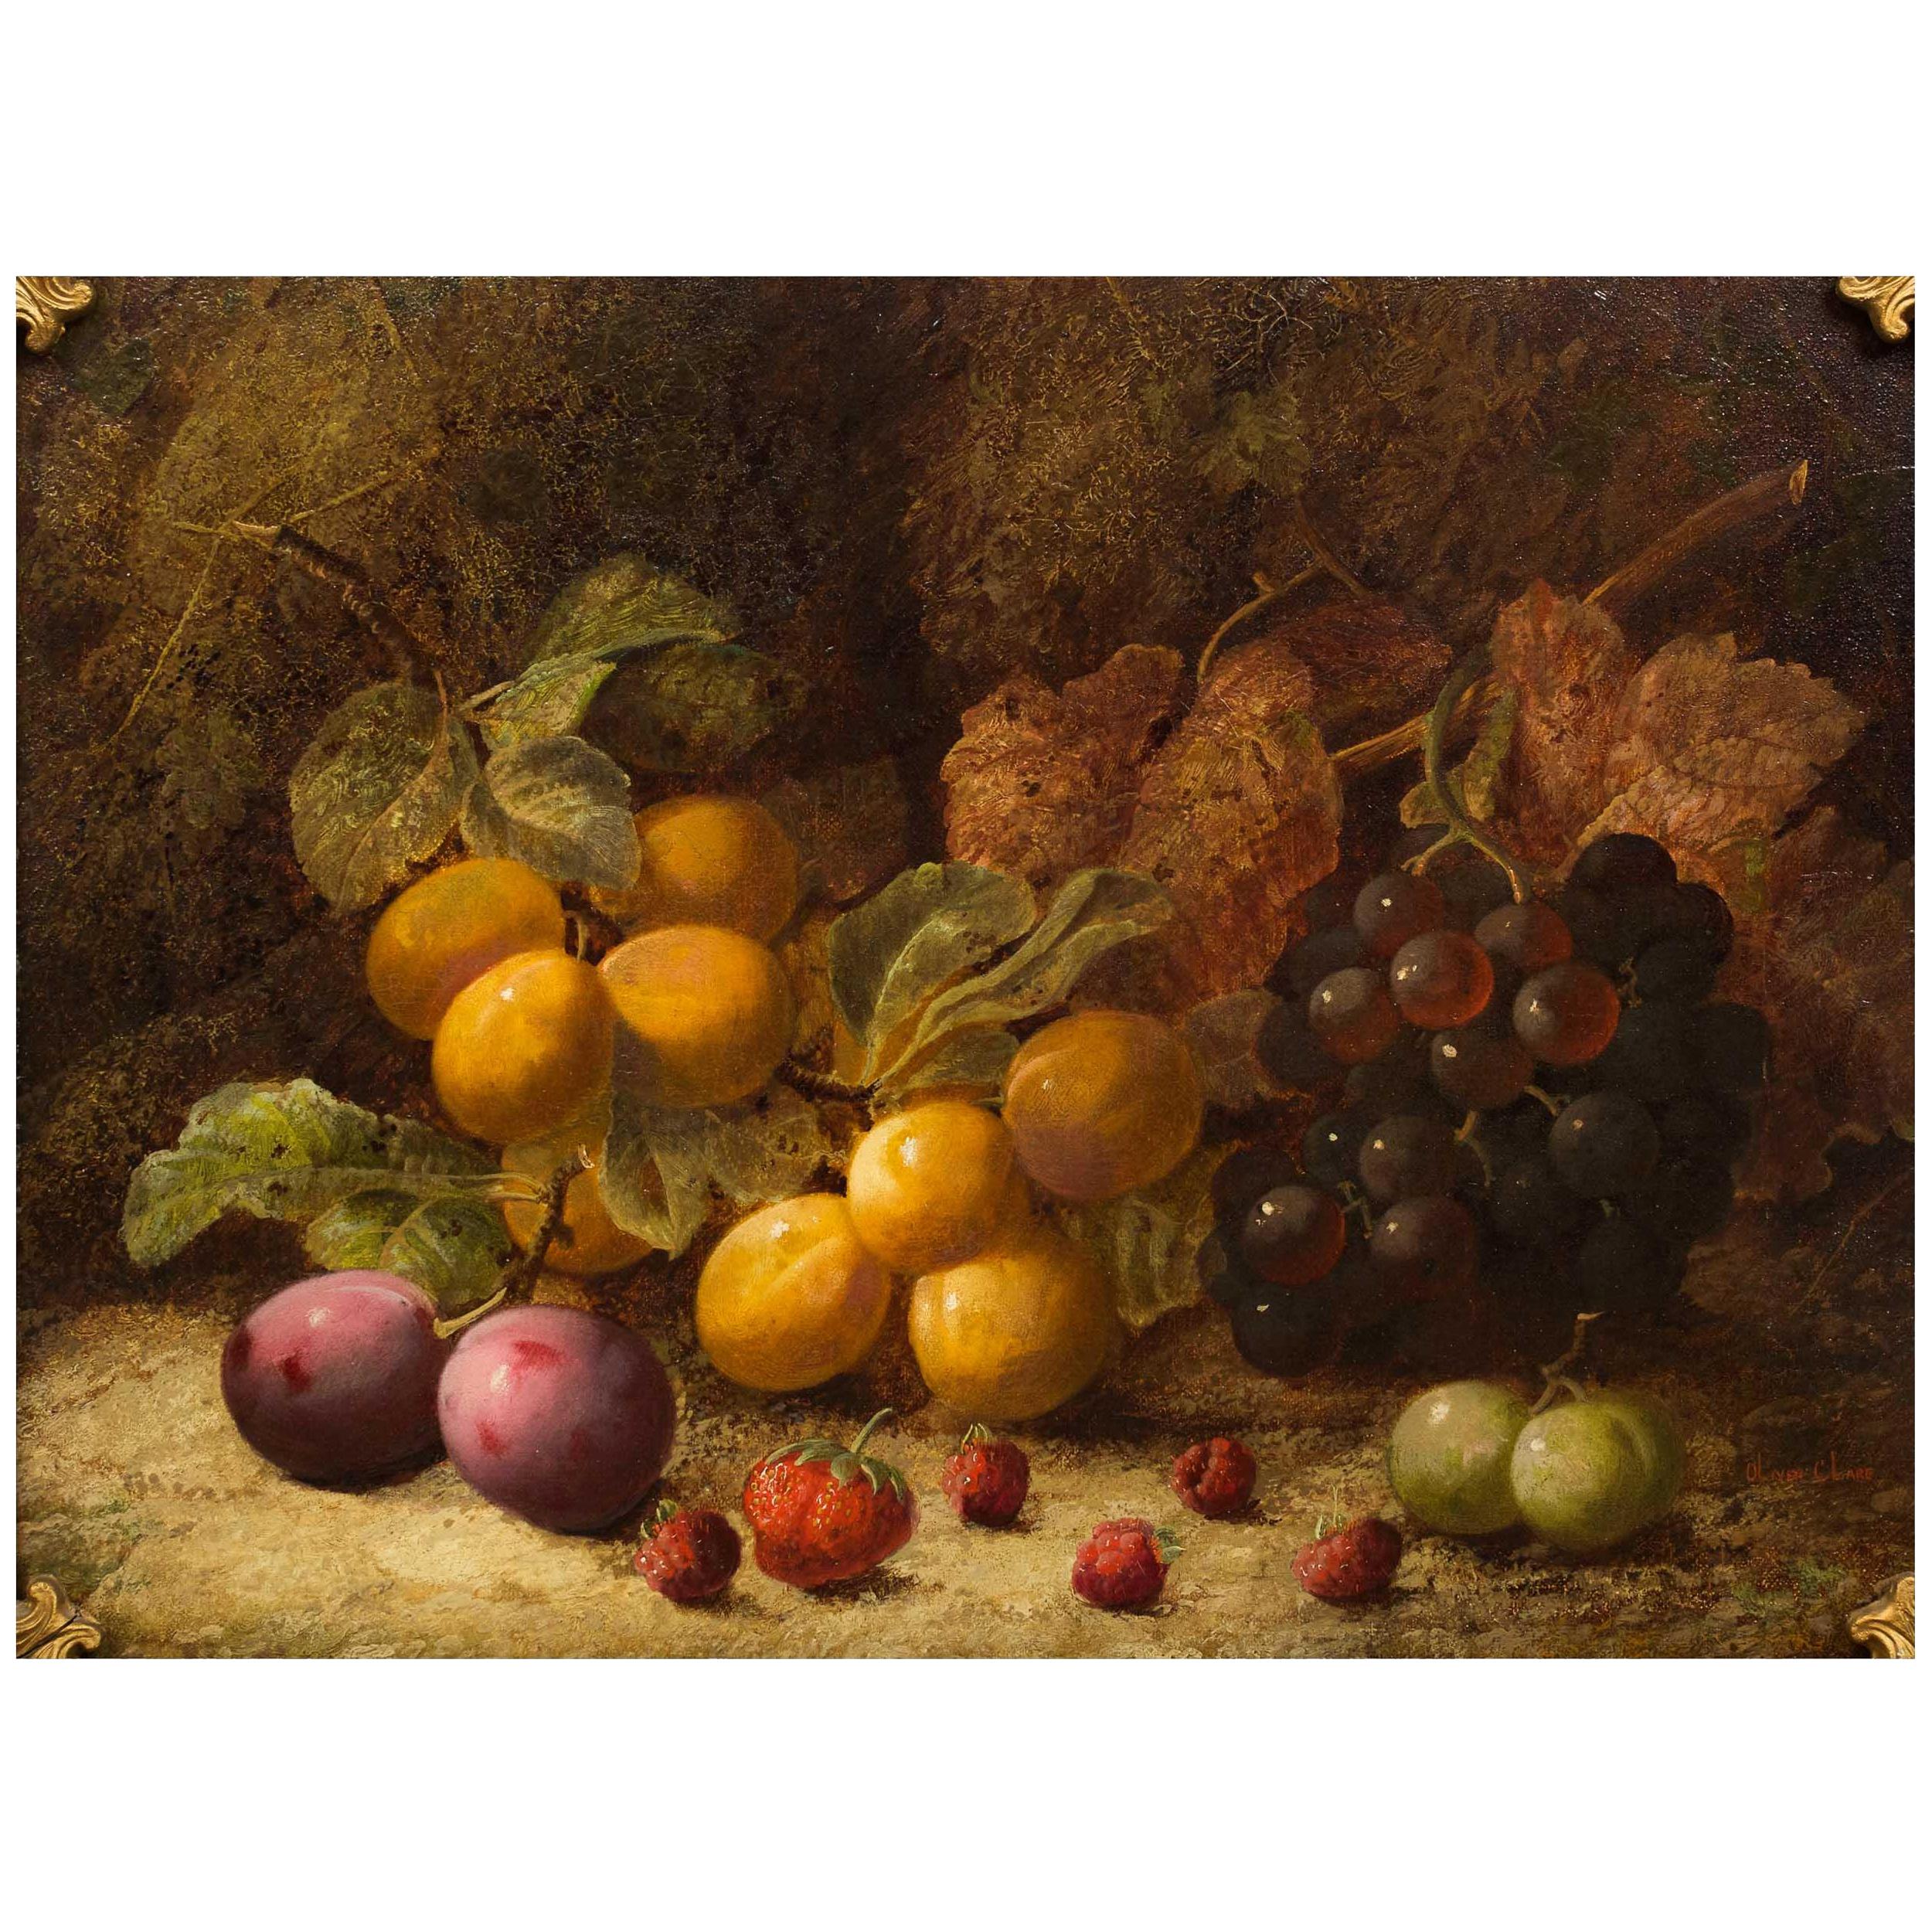 Antique English Still-Life Painting of Fruit by Oliver Clare